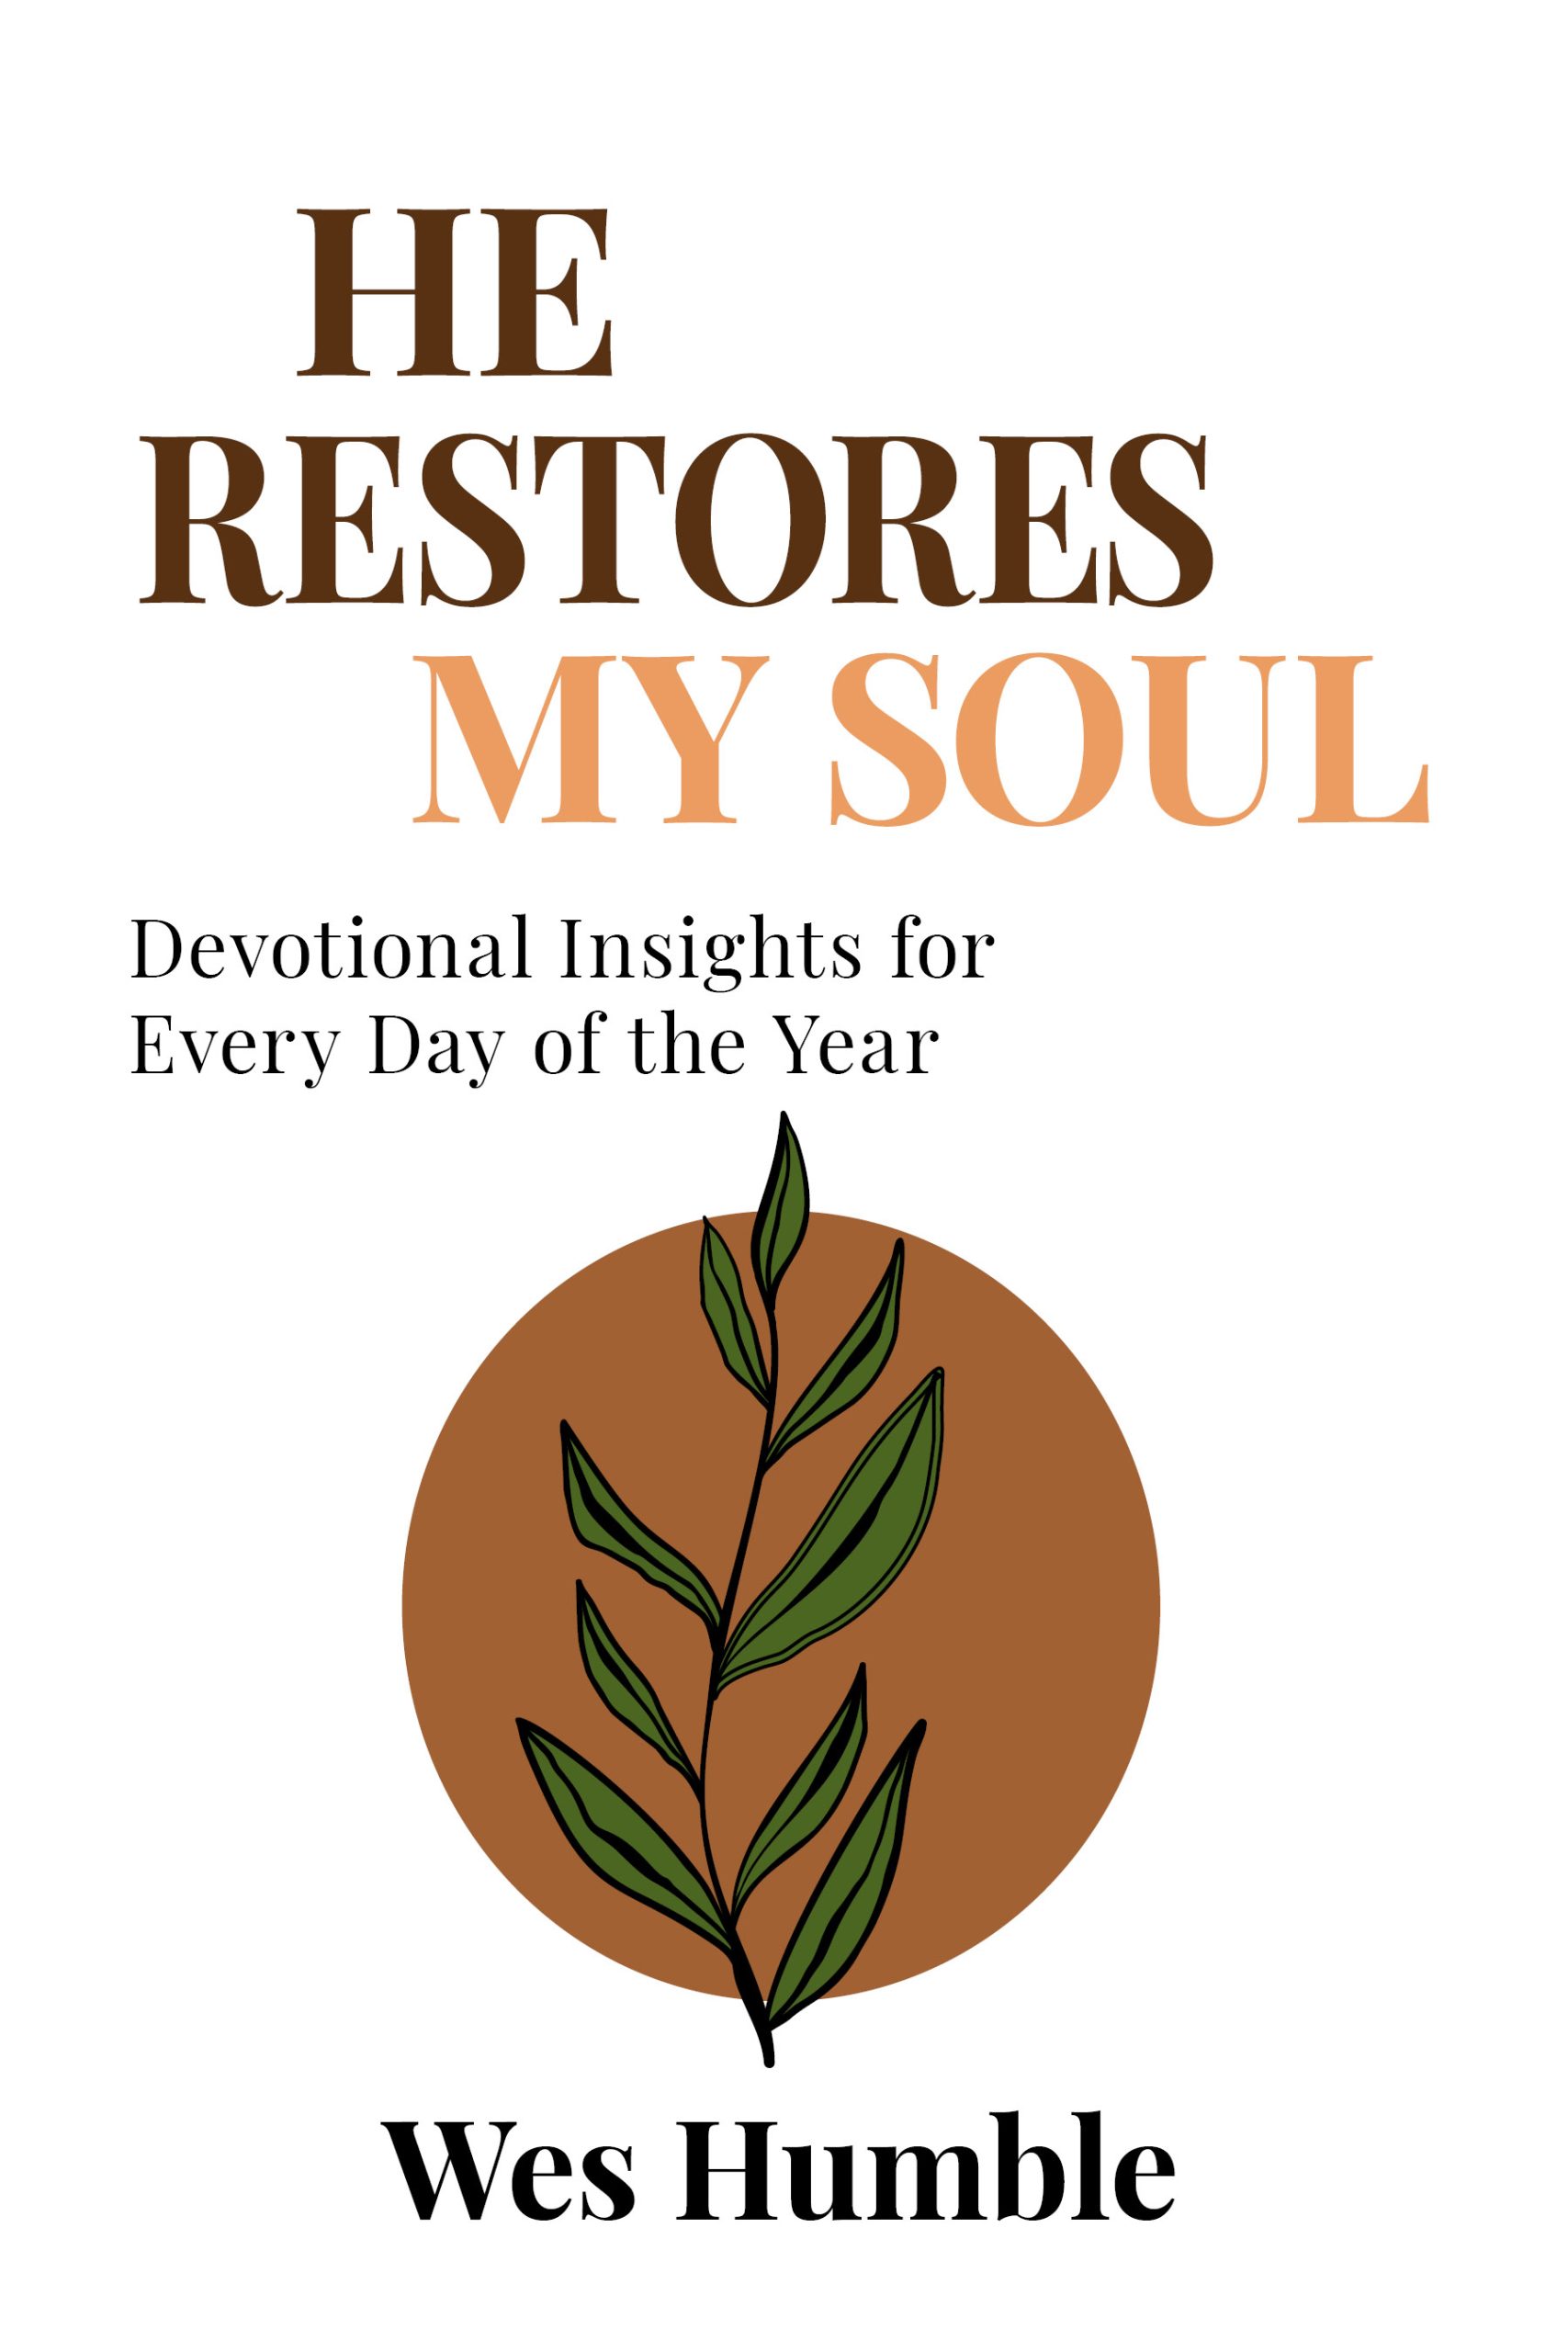 He Restores My Soul by Wes Humble